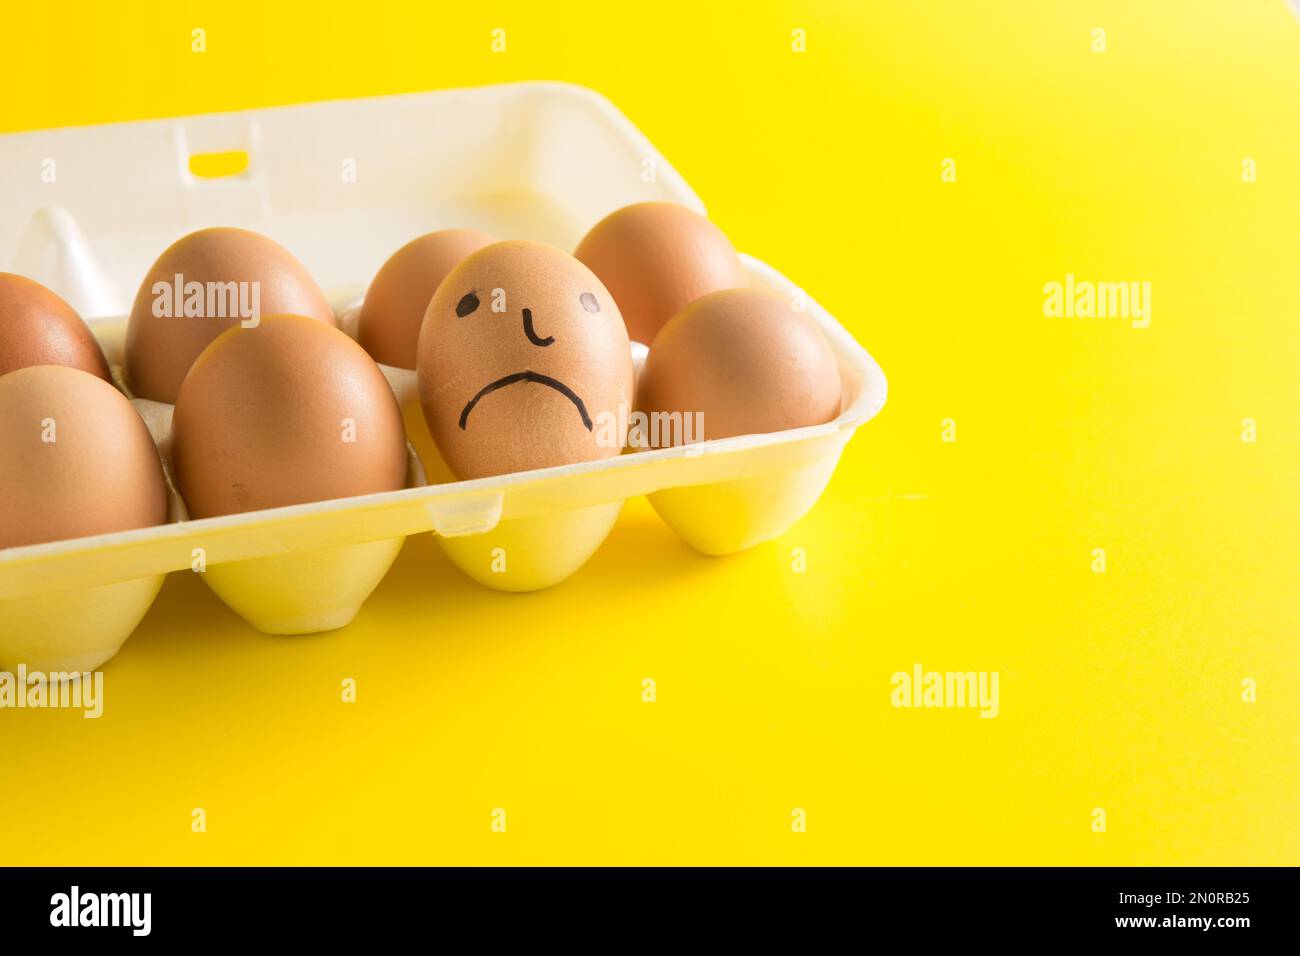 Eggs on a yellow background Stock Photo